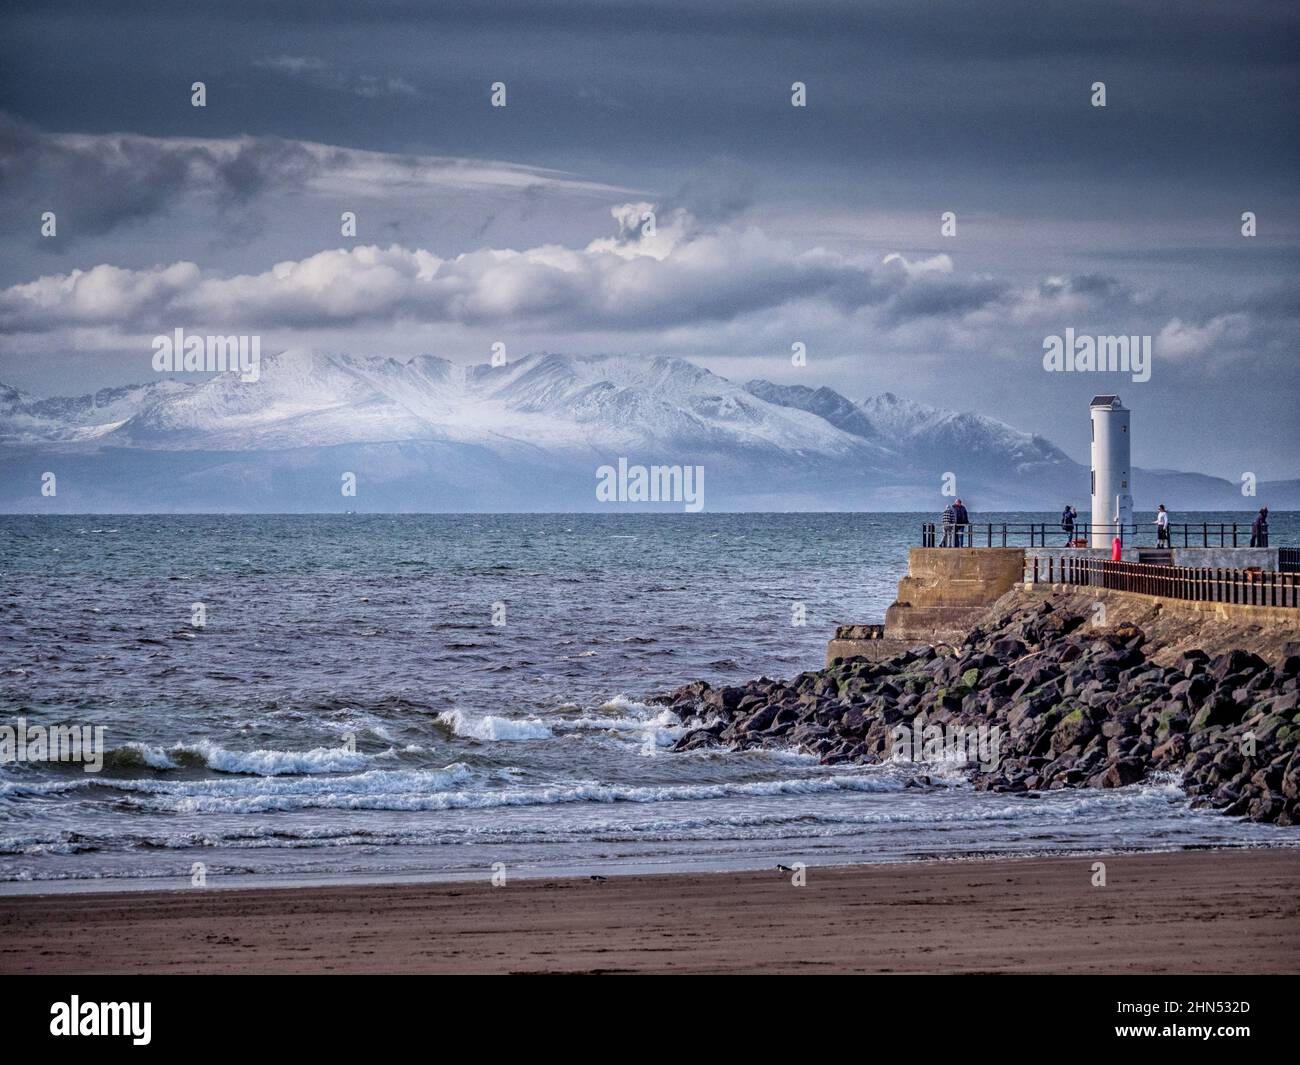 Winter view looking towards Isle of Arran sonw capped peaks from the beach at Ayr. Stock Photo